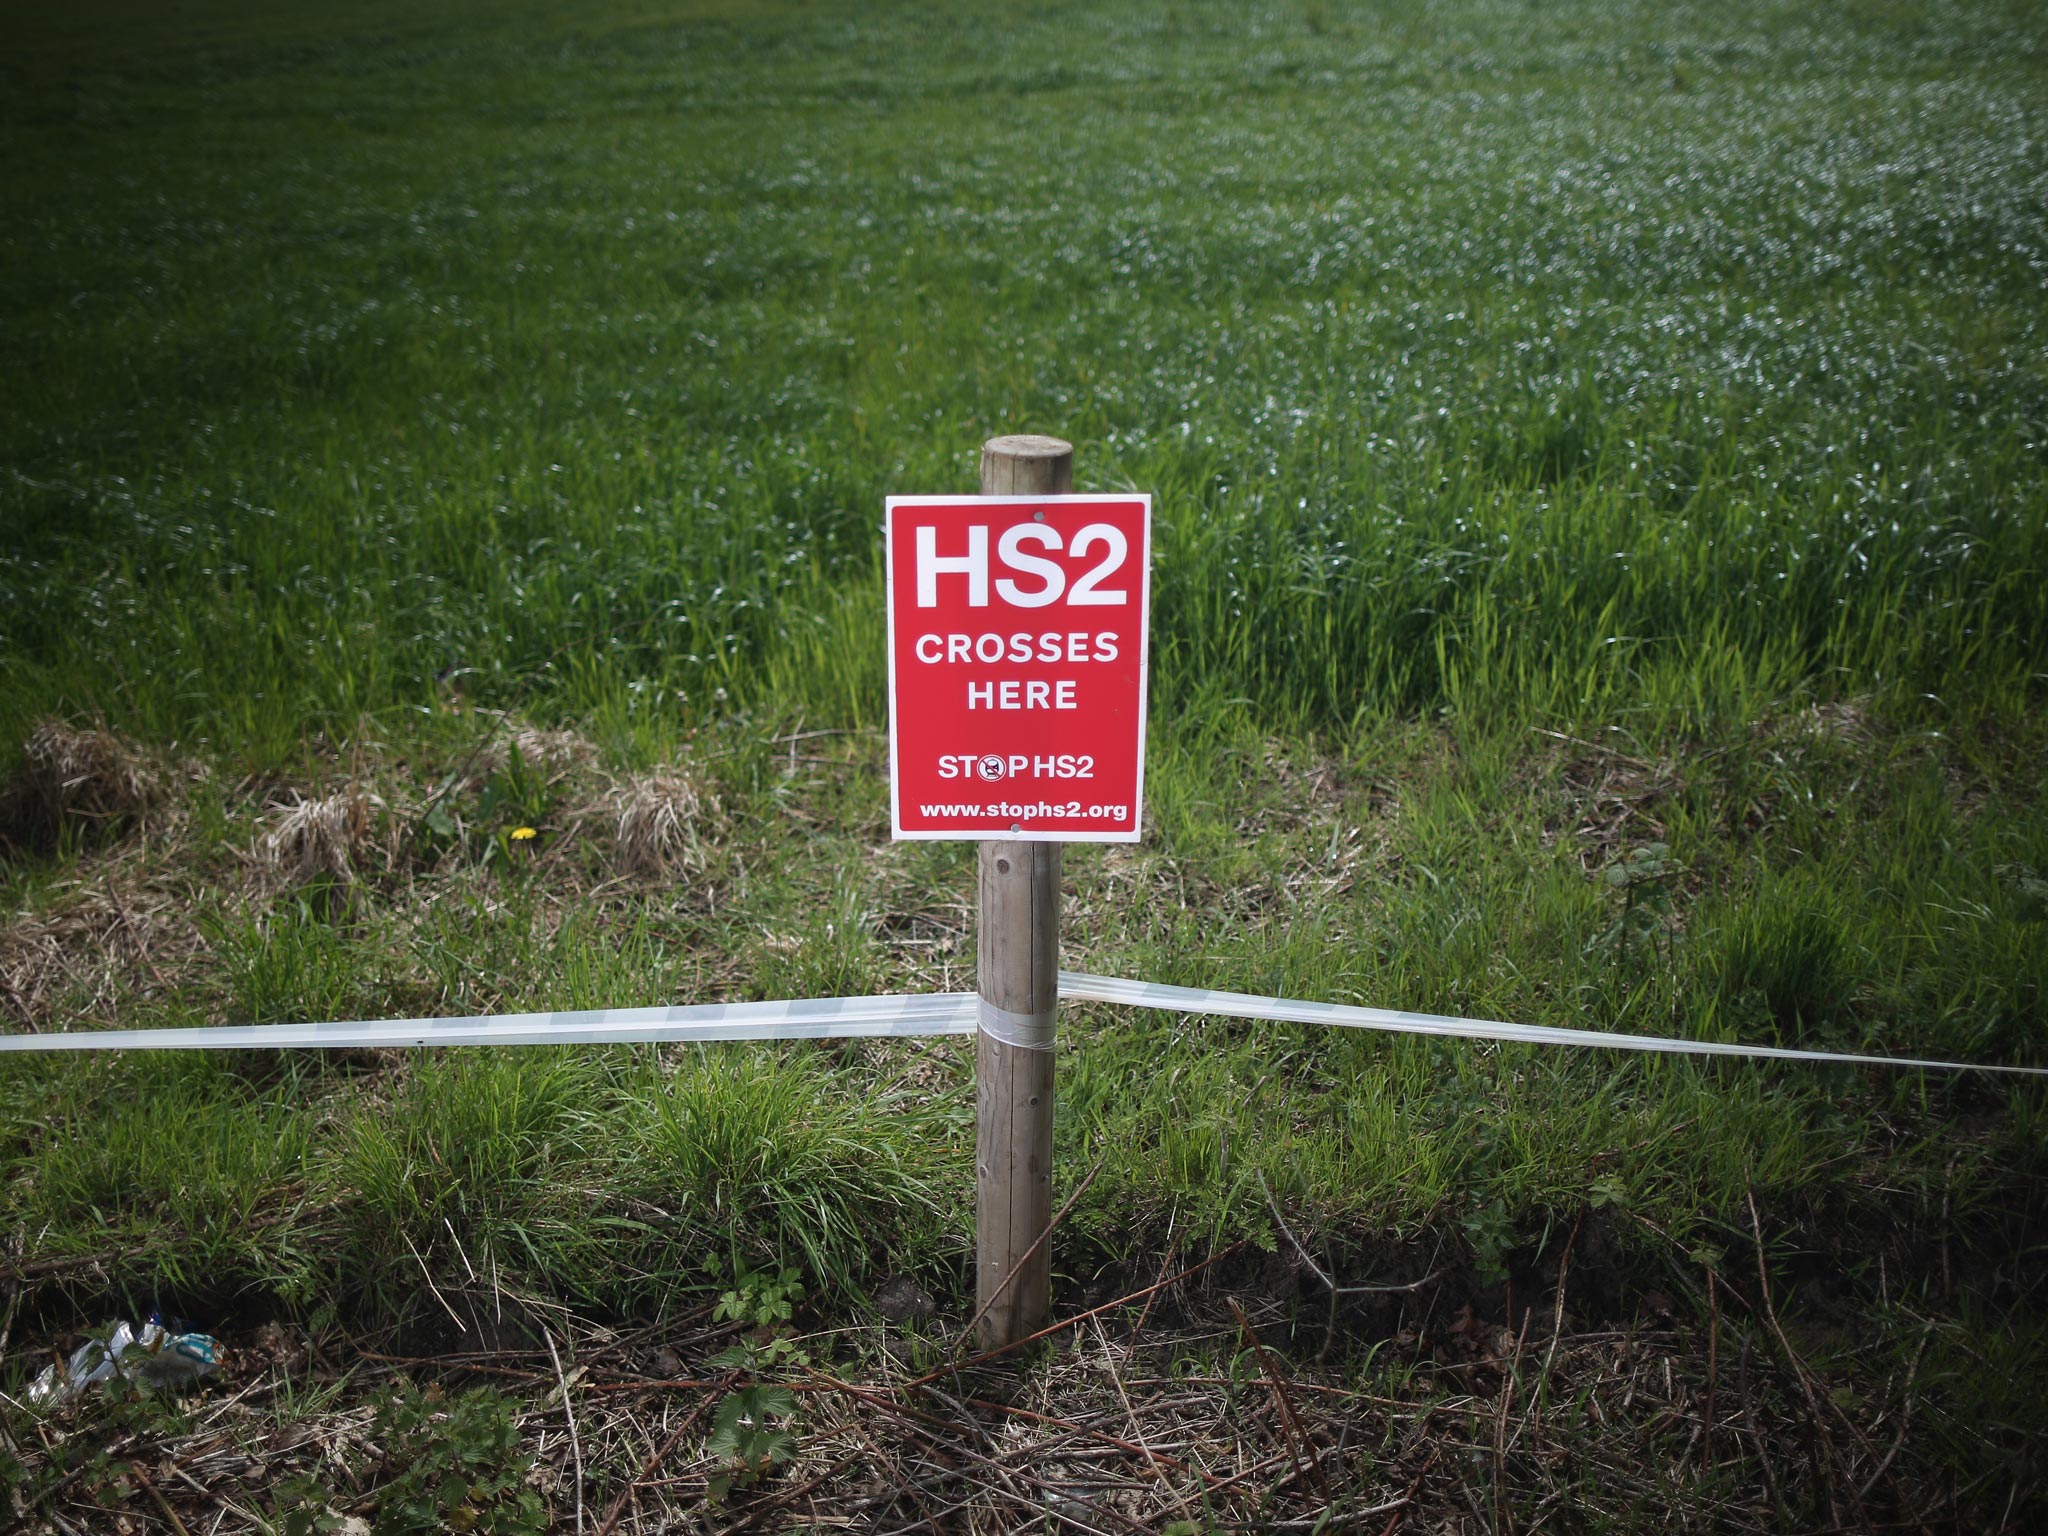 The remains of one village in Buckinghamshire could be completely lost with the construction of the HS2 railway line